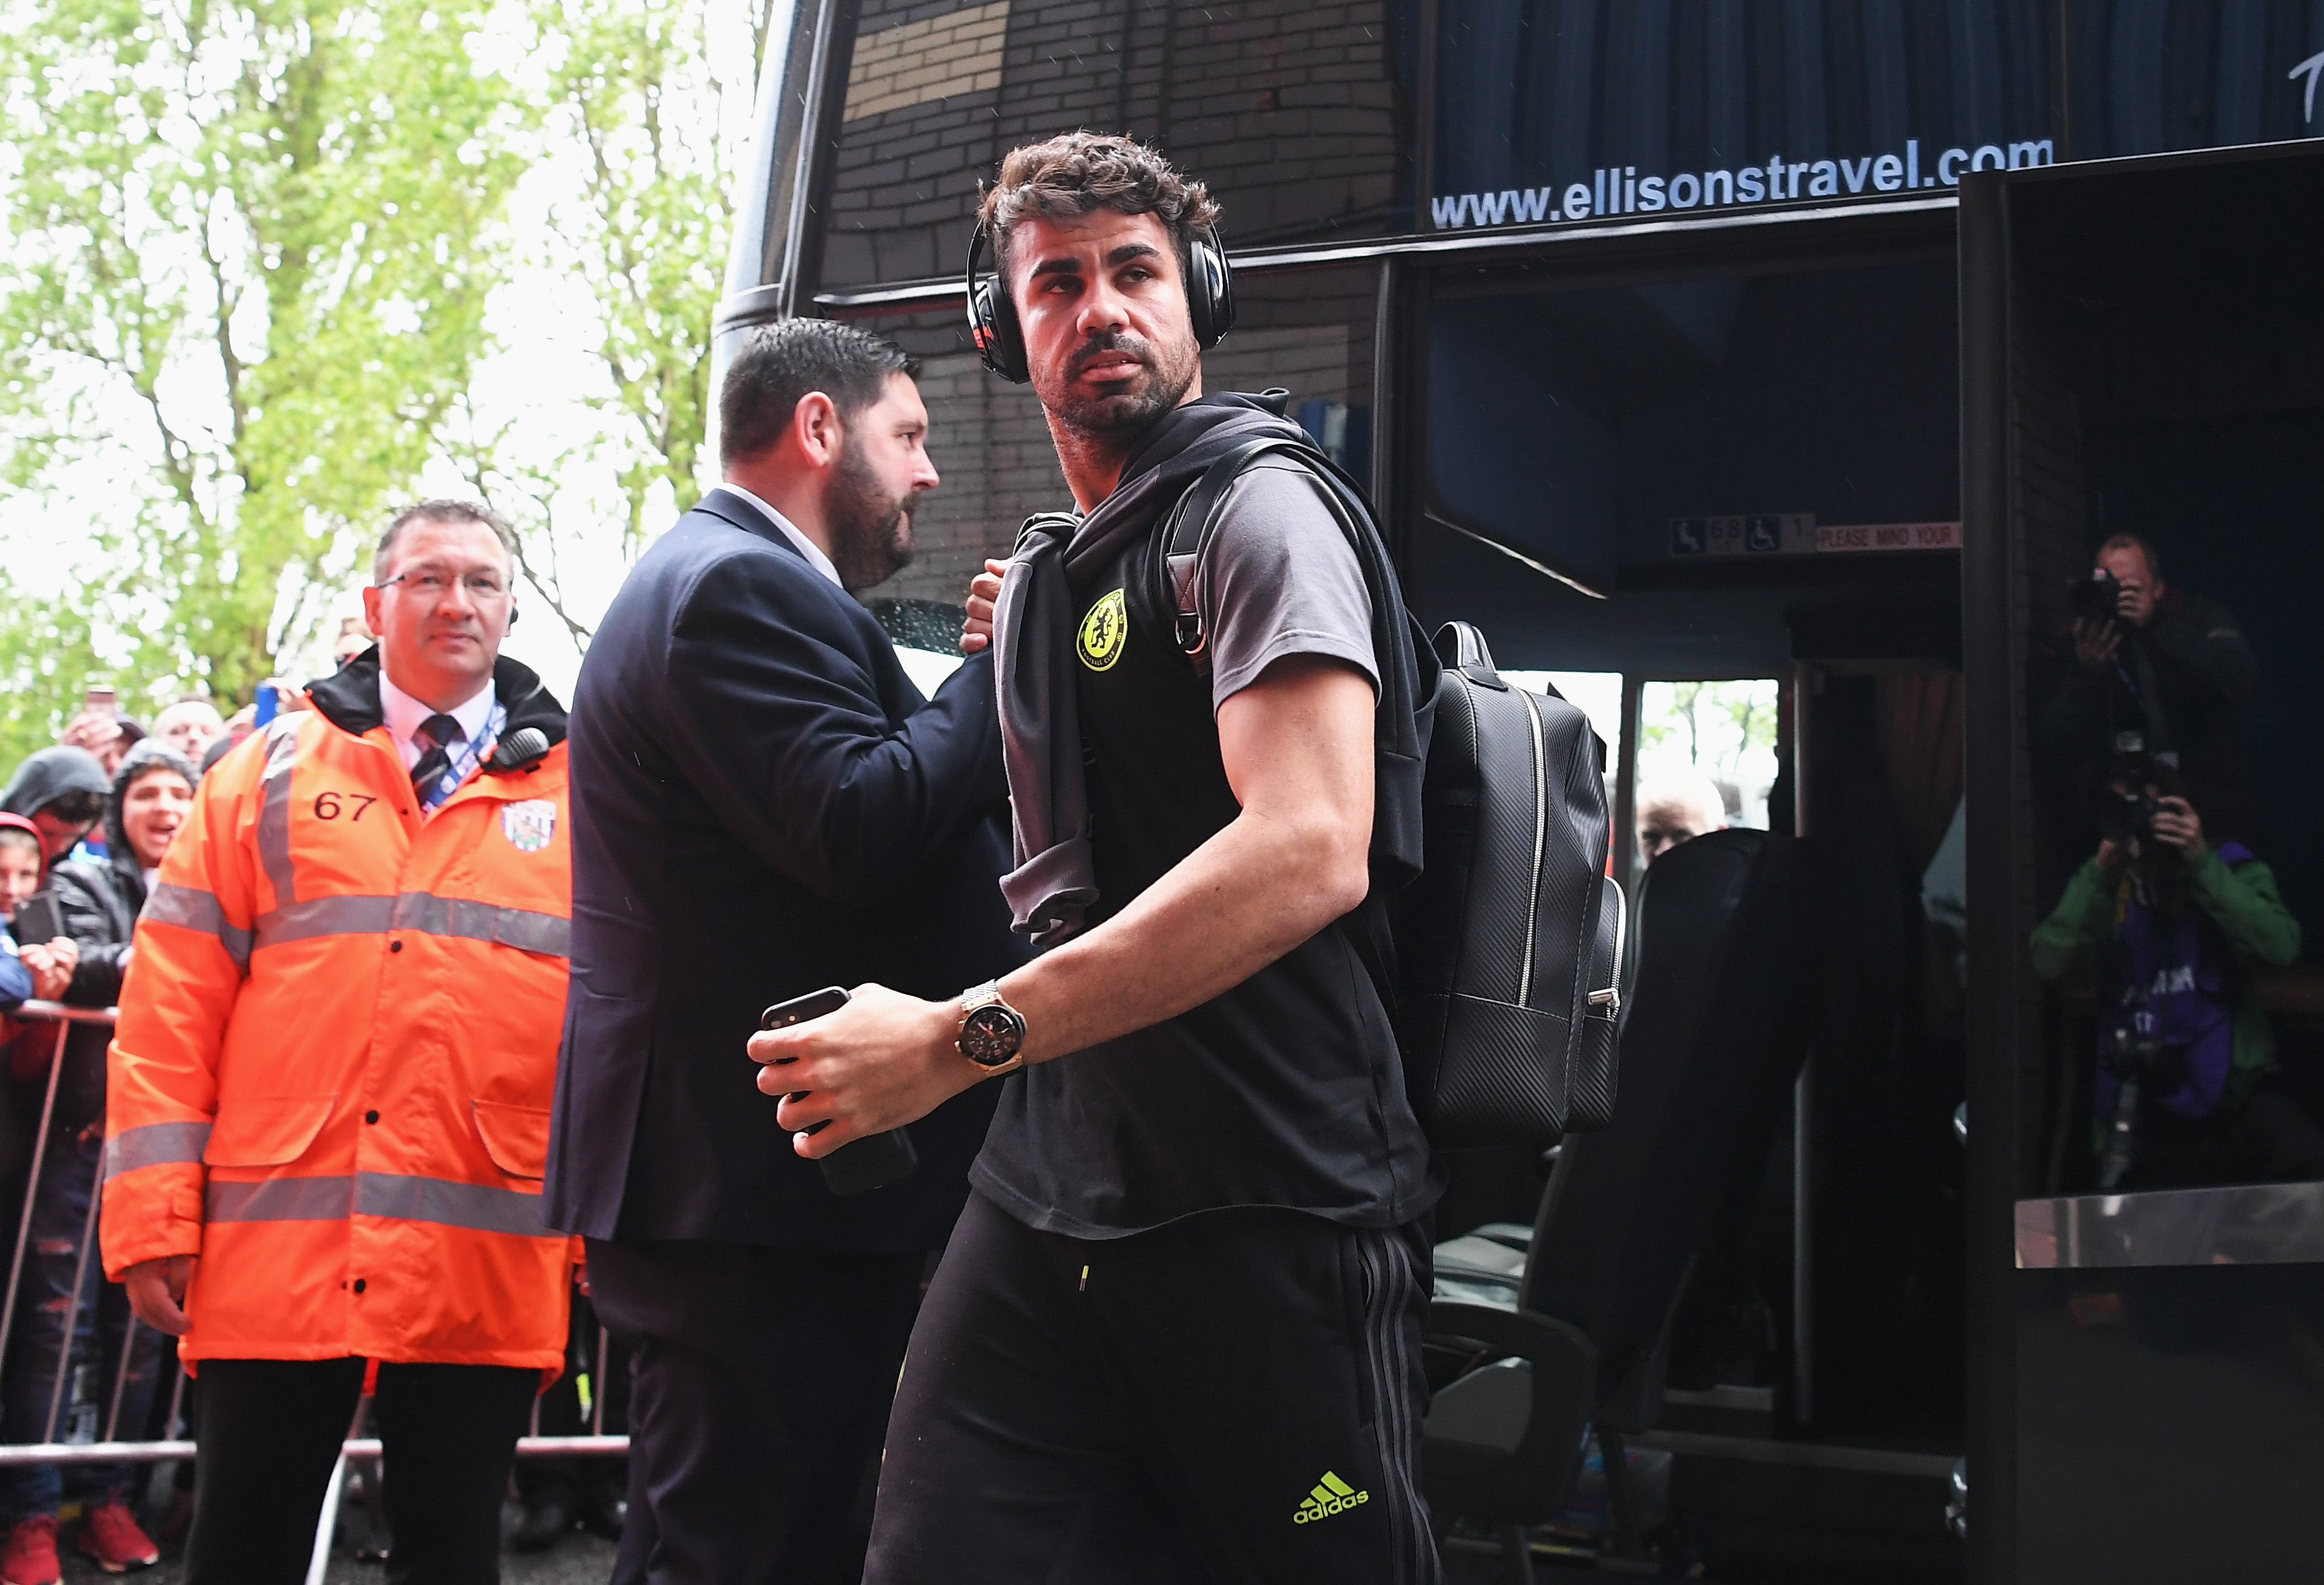 WEST BROMWICH, ENGLAND - MAY 12: Diego Costa of Chelsea arrives at the stadium prior to the Premier League match between West Bromwich Albion and Chelsea at The Hawthorns on May 12, 2017 in West Bromwich, England.  (Photo by Laurence Griffiths/Getty Images)